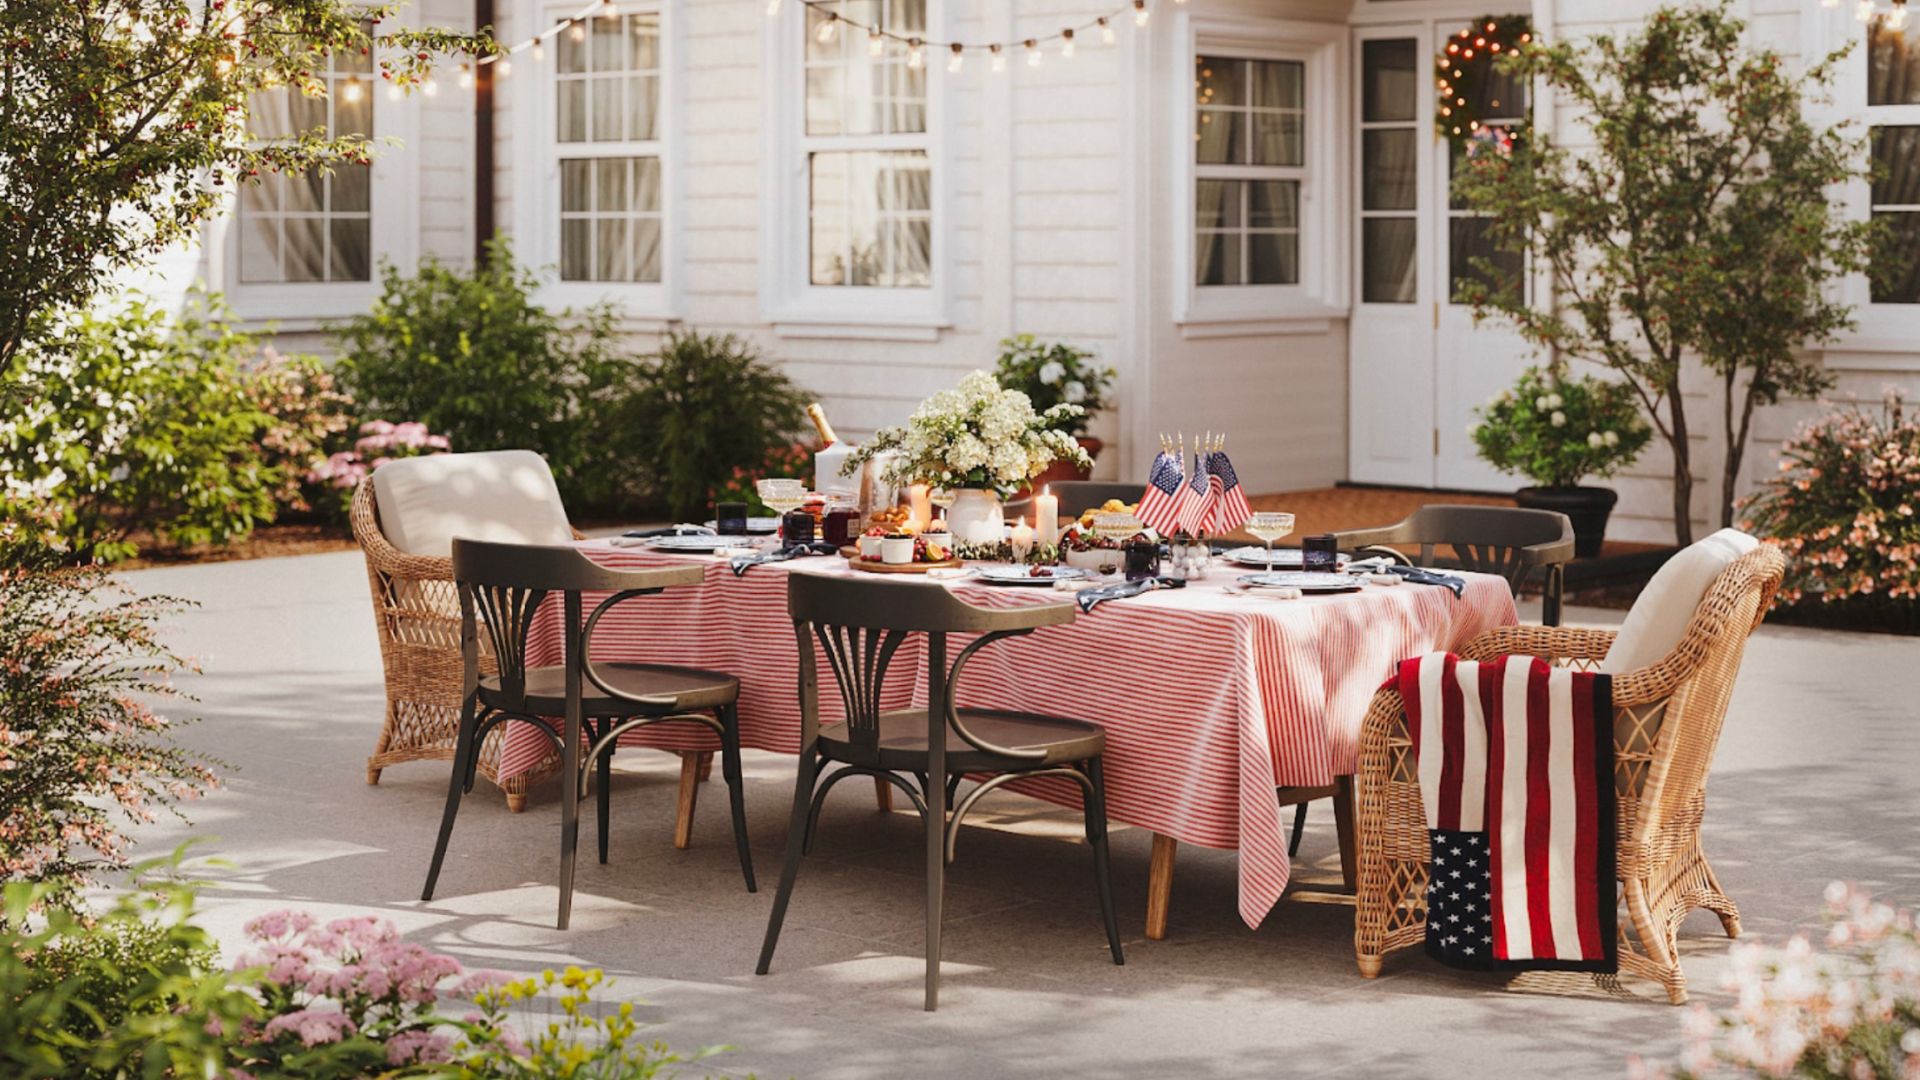 An inviting outdoor dining area prepared for a Fourth of July celebration, combining product placement with seasonal festivities for a targeted marketing approach.